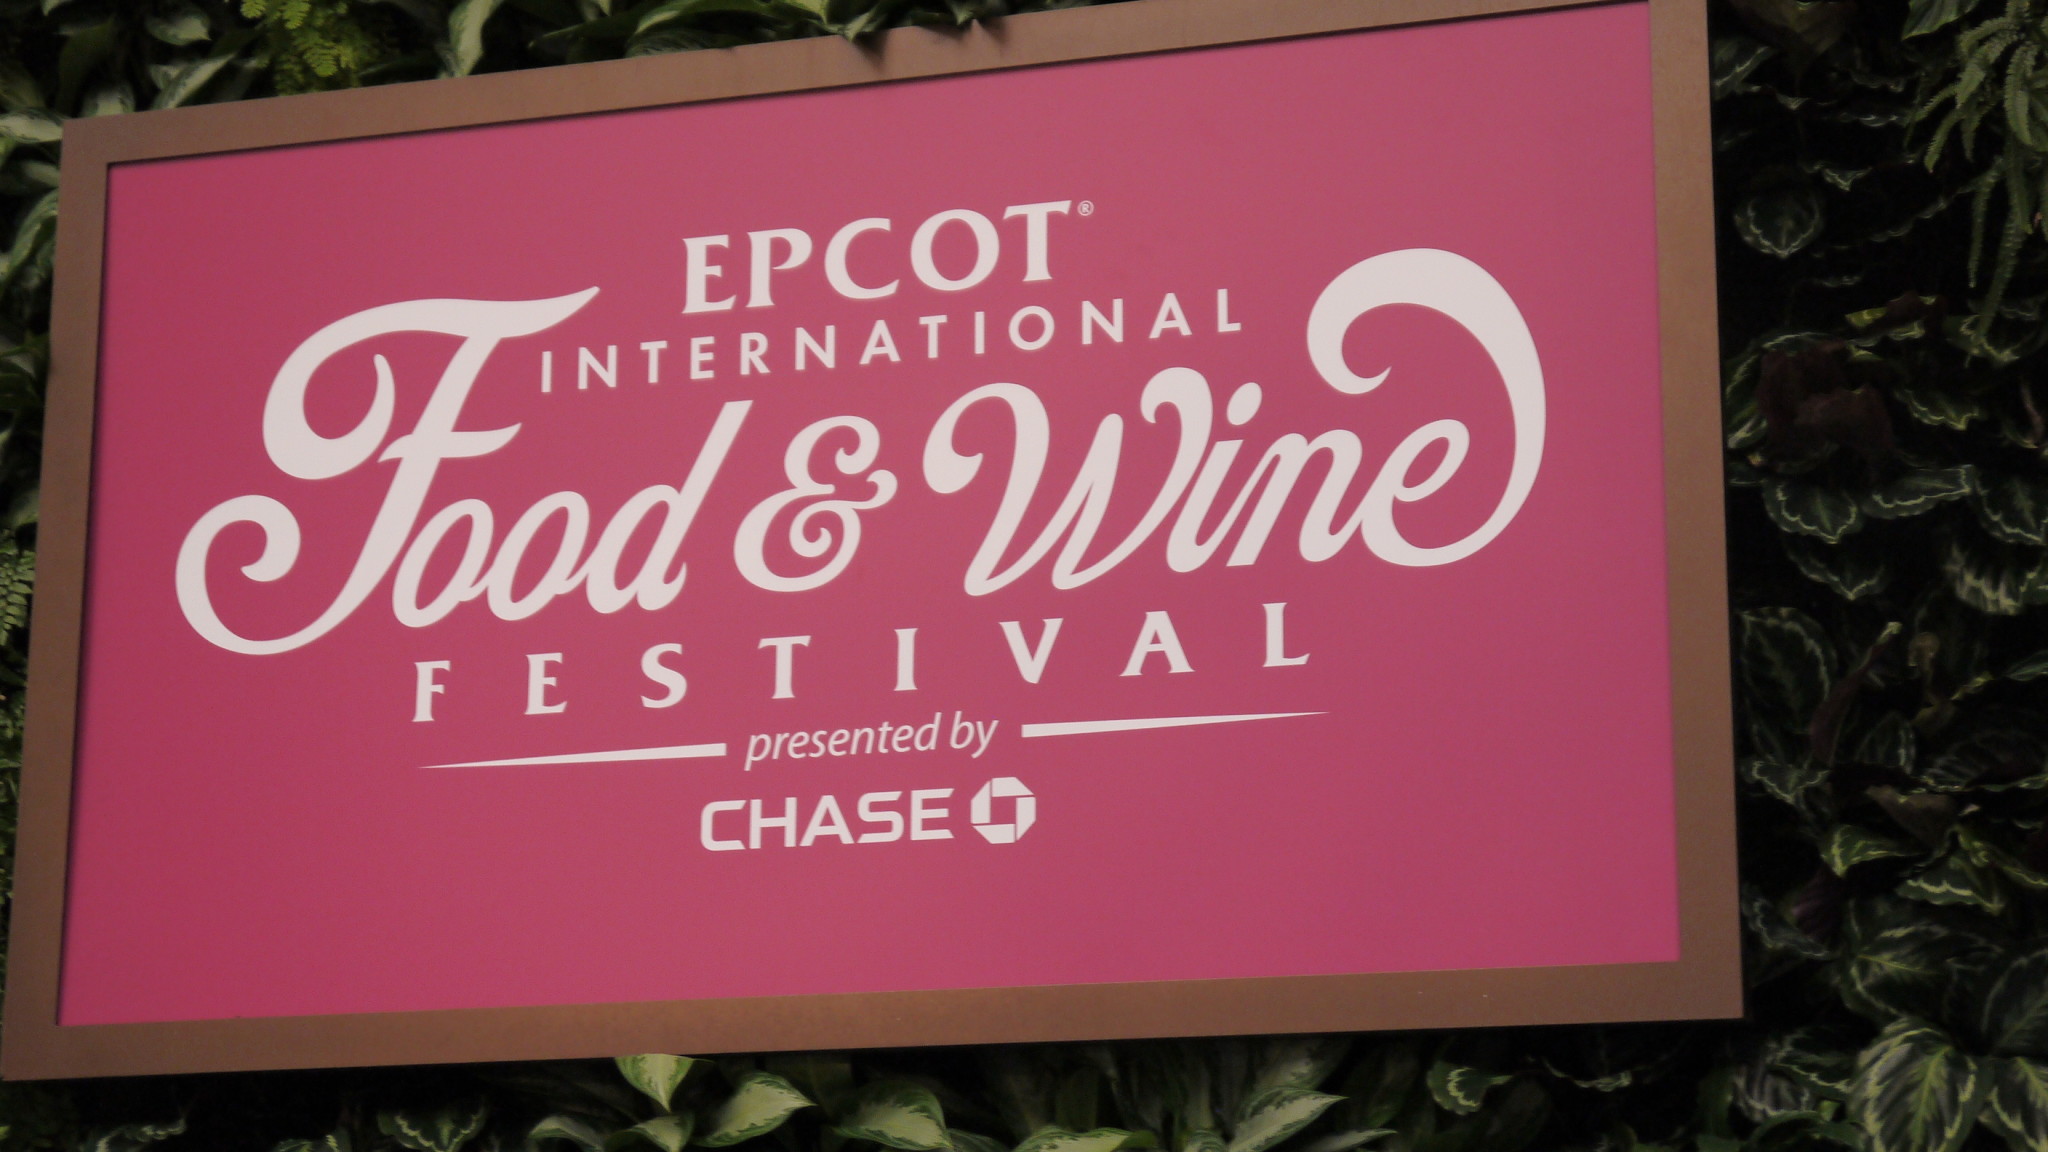 Epcot International Food & Wine Festival 2015 Details – Food Booths, Eat to the Beat and More!